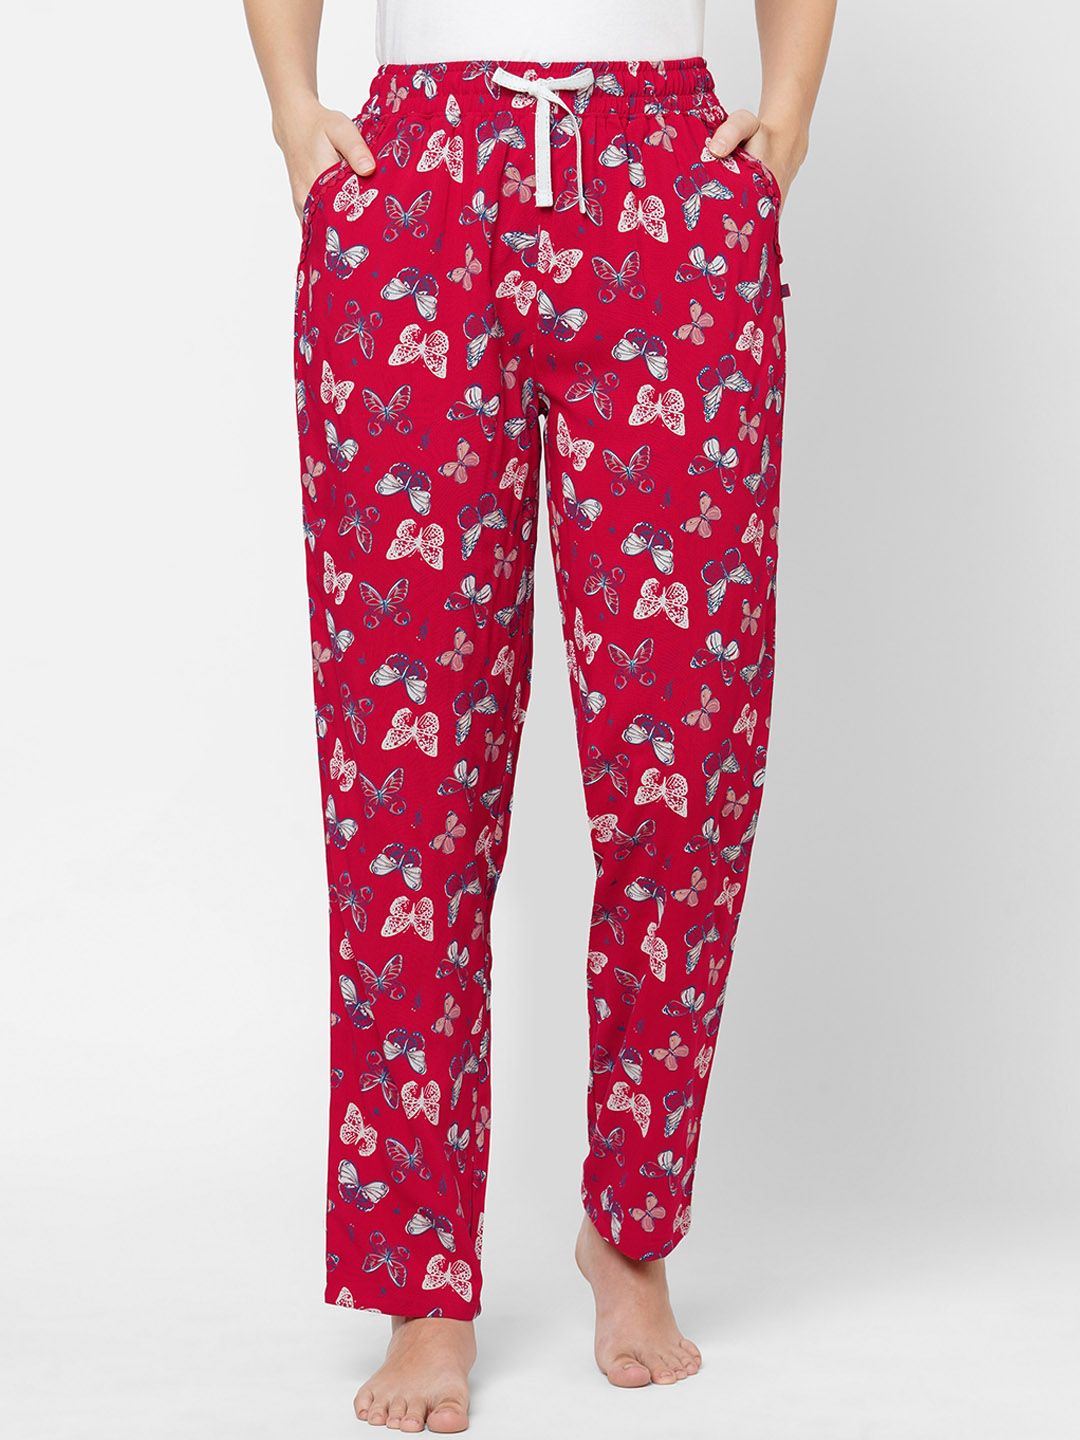 MAYSIXTY Women Red Butterfly Printed Cotton Lounge Pants Price in India